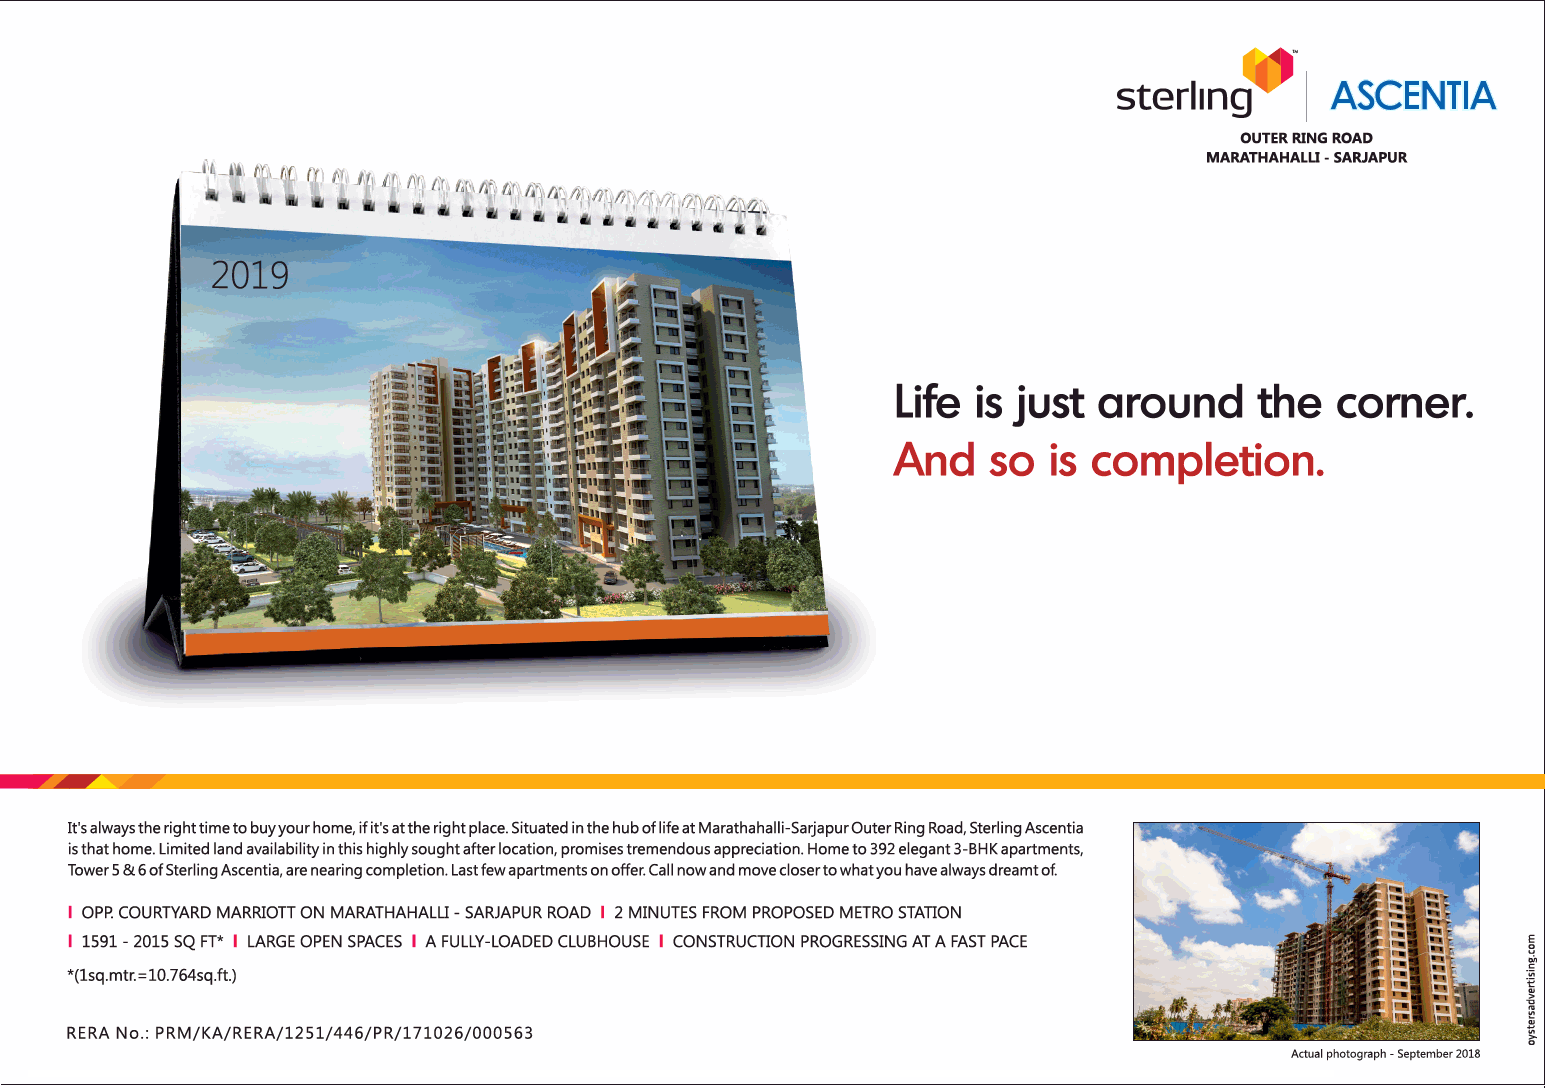 Grab the right time to buy your home at Sterling Ascentia in Bangalore